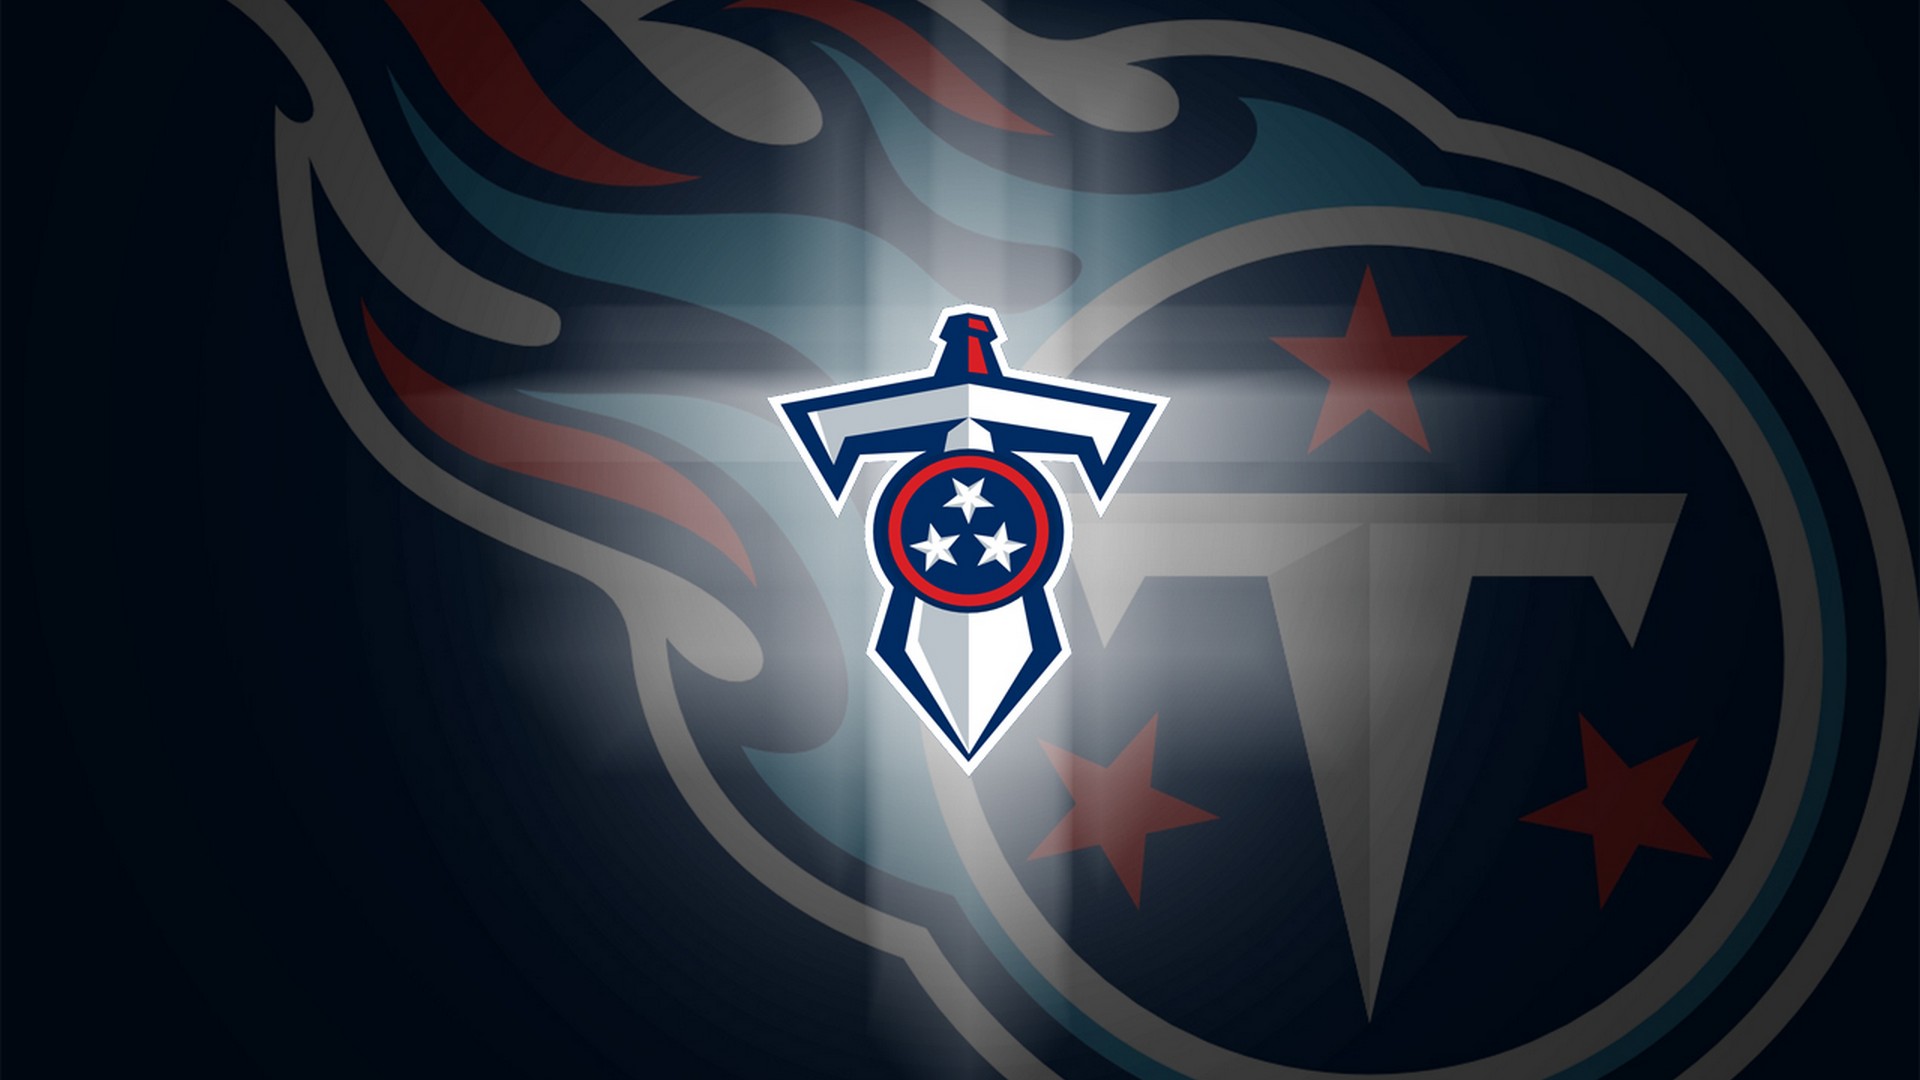 Tennessee Titans Mac Wallpaper with high-resolution 1920x1080 pixel. Download and set as wallpaper for Desktop Computer, Apple iPhone X, XS Max, XR, 8, 7, 6, SE, iPad, Android